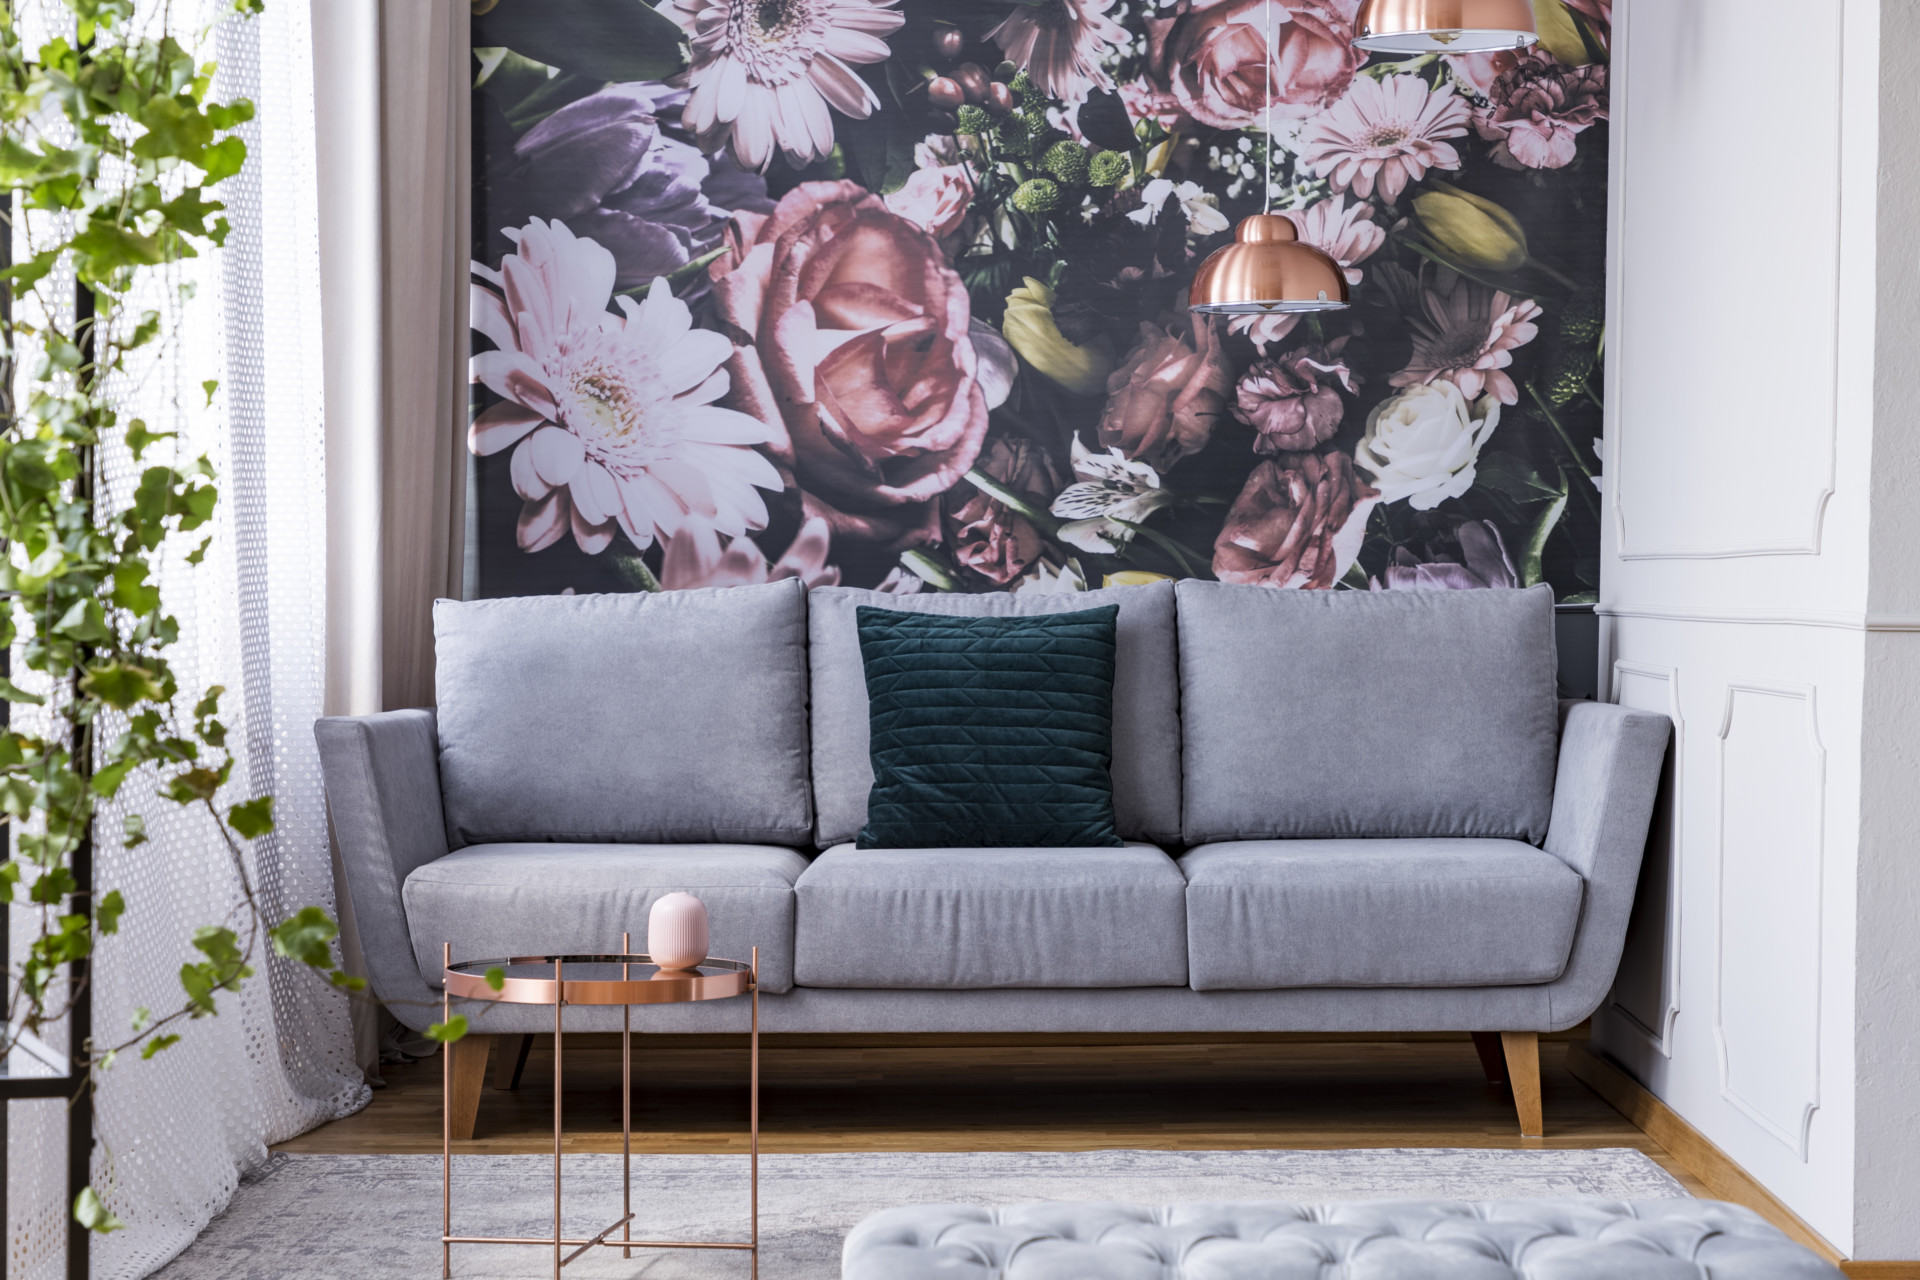 Copper table on carpet and green pillow on grey couch in flowers living room interior. Real photo